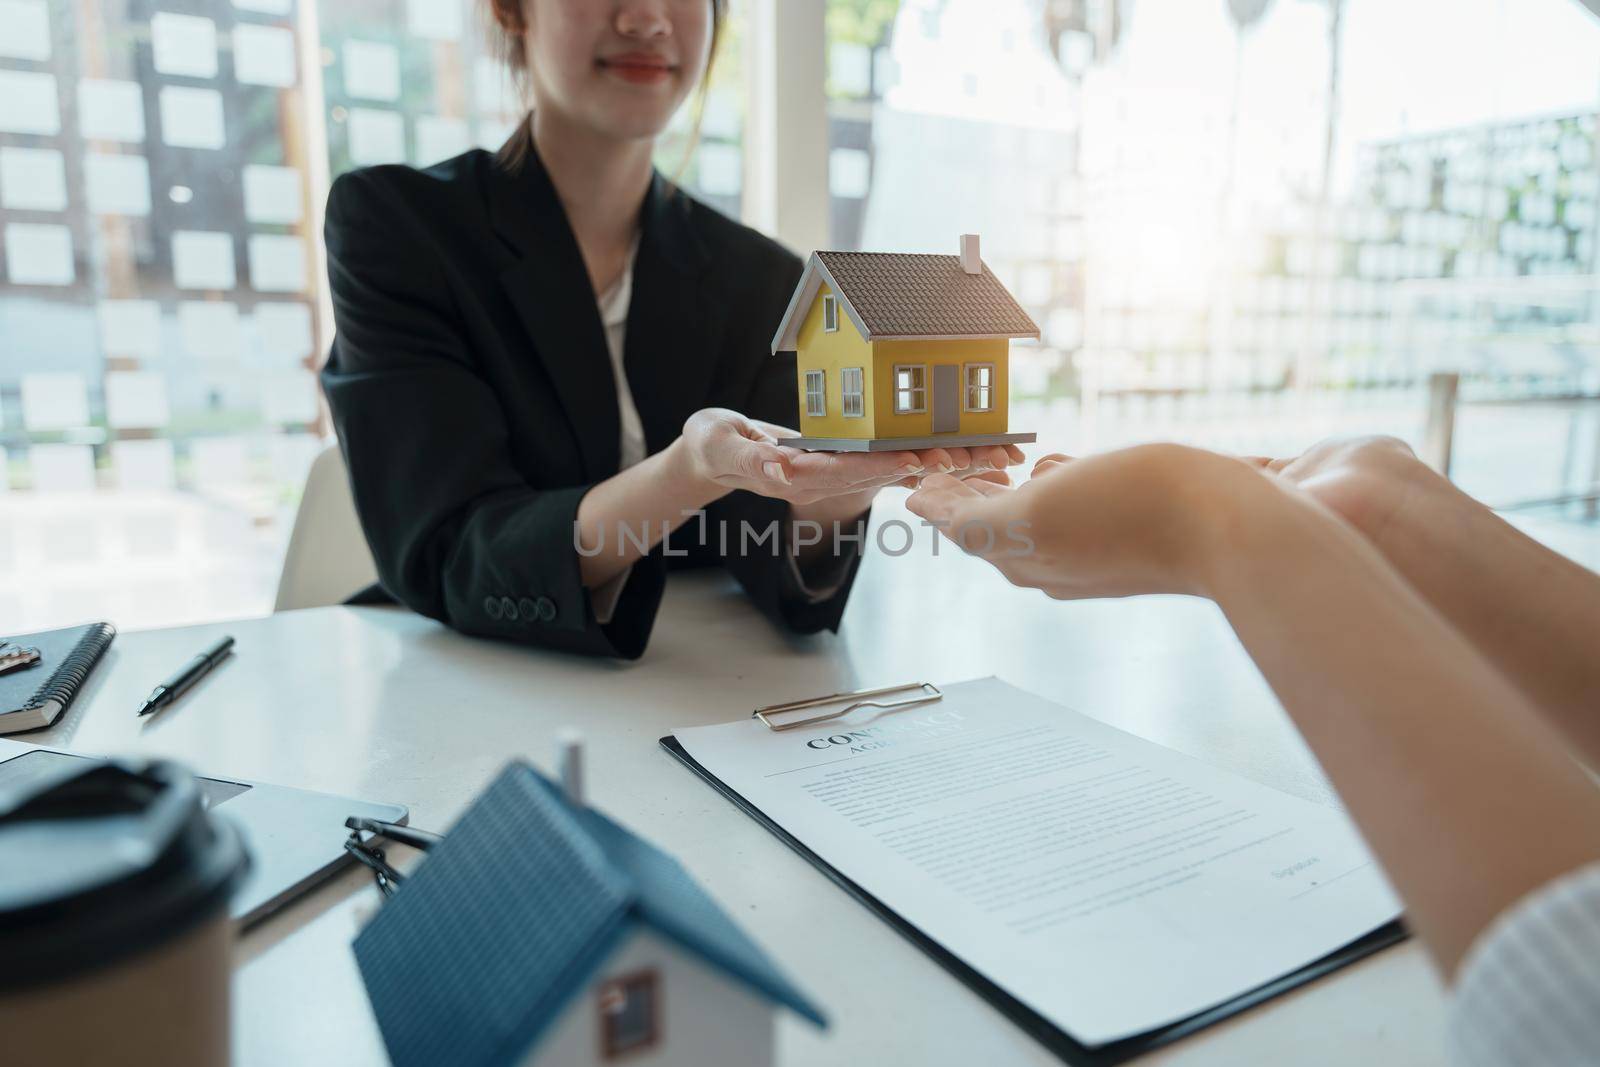 Guarantee, mortgage, agreement, contract, sign, real estate agent delivers the house to the customer after signing important contract documents by Manastrong